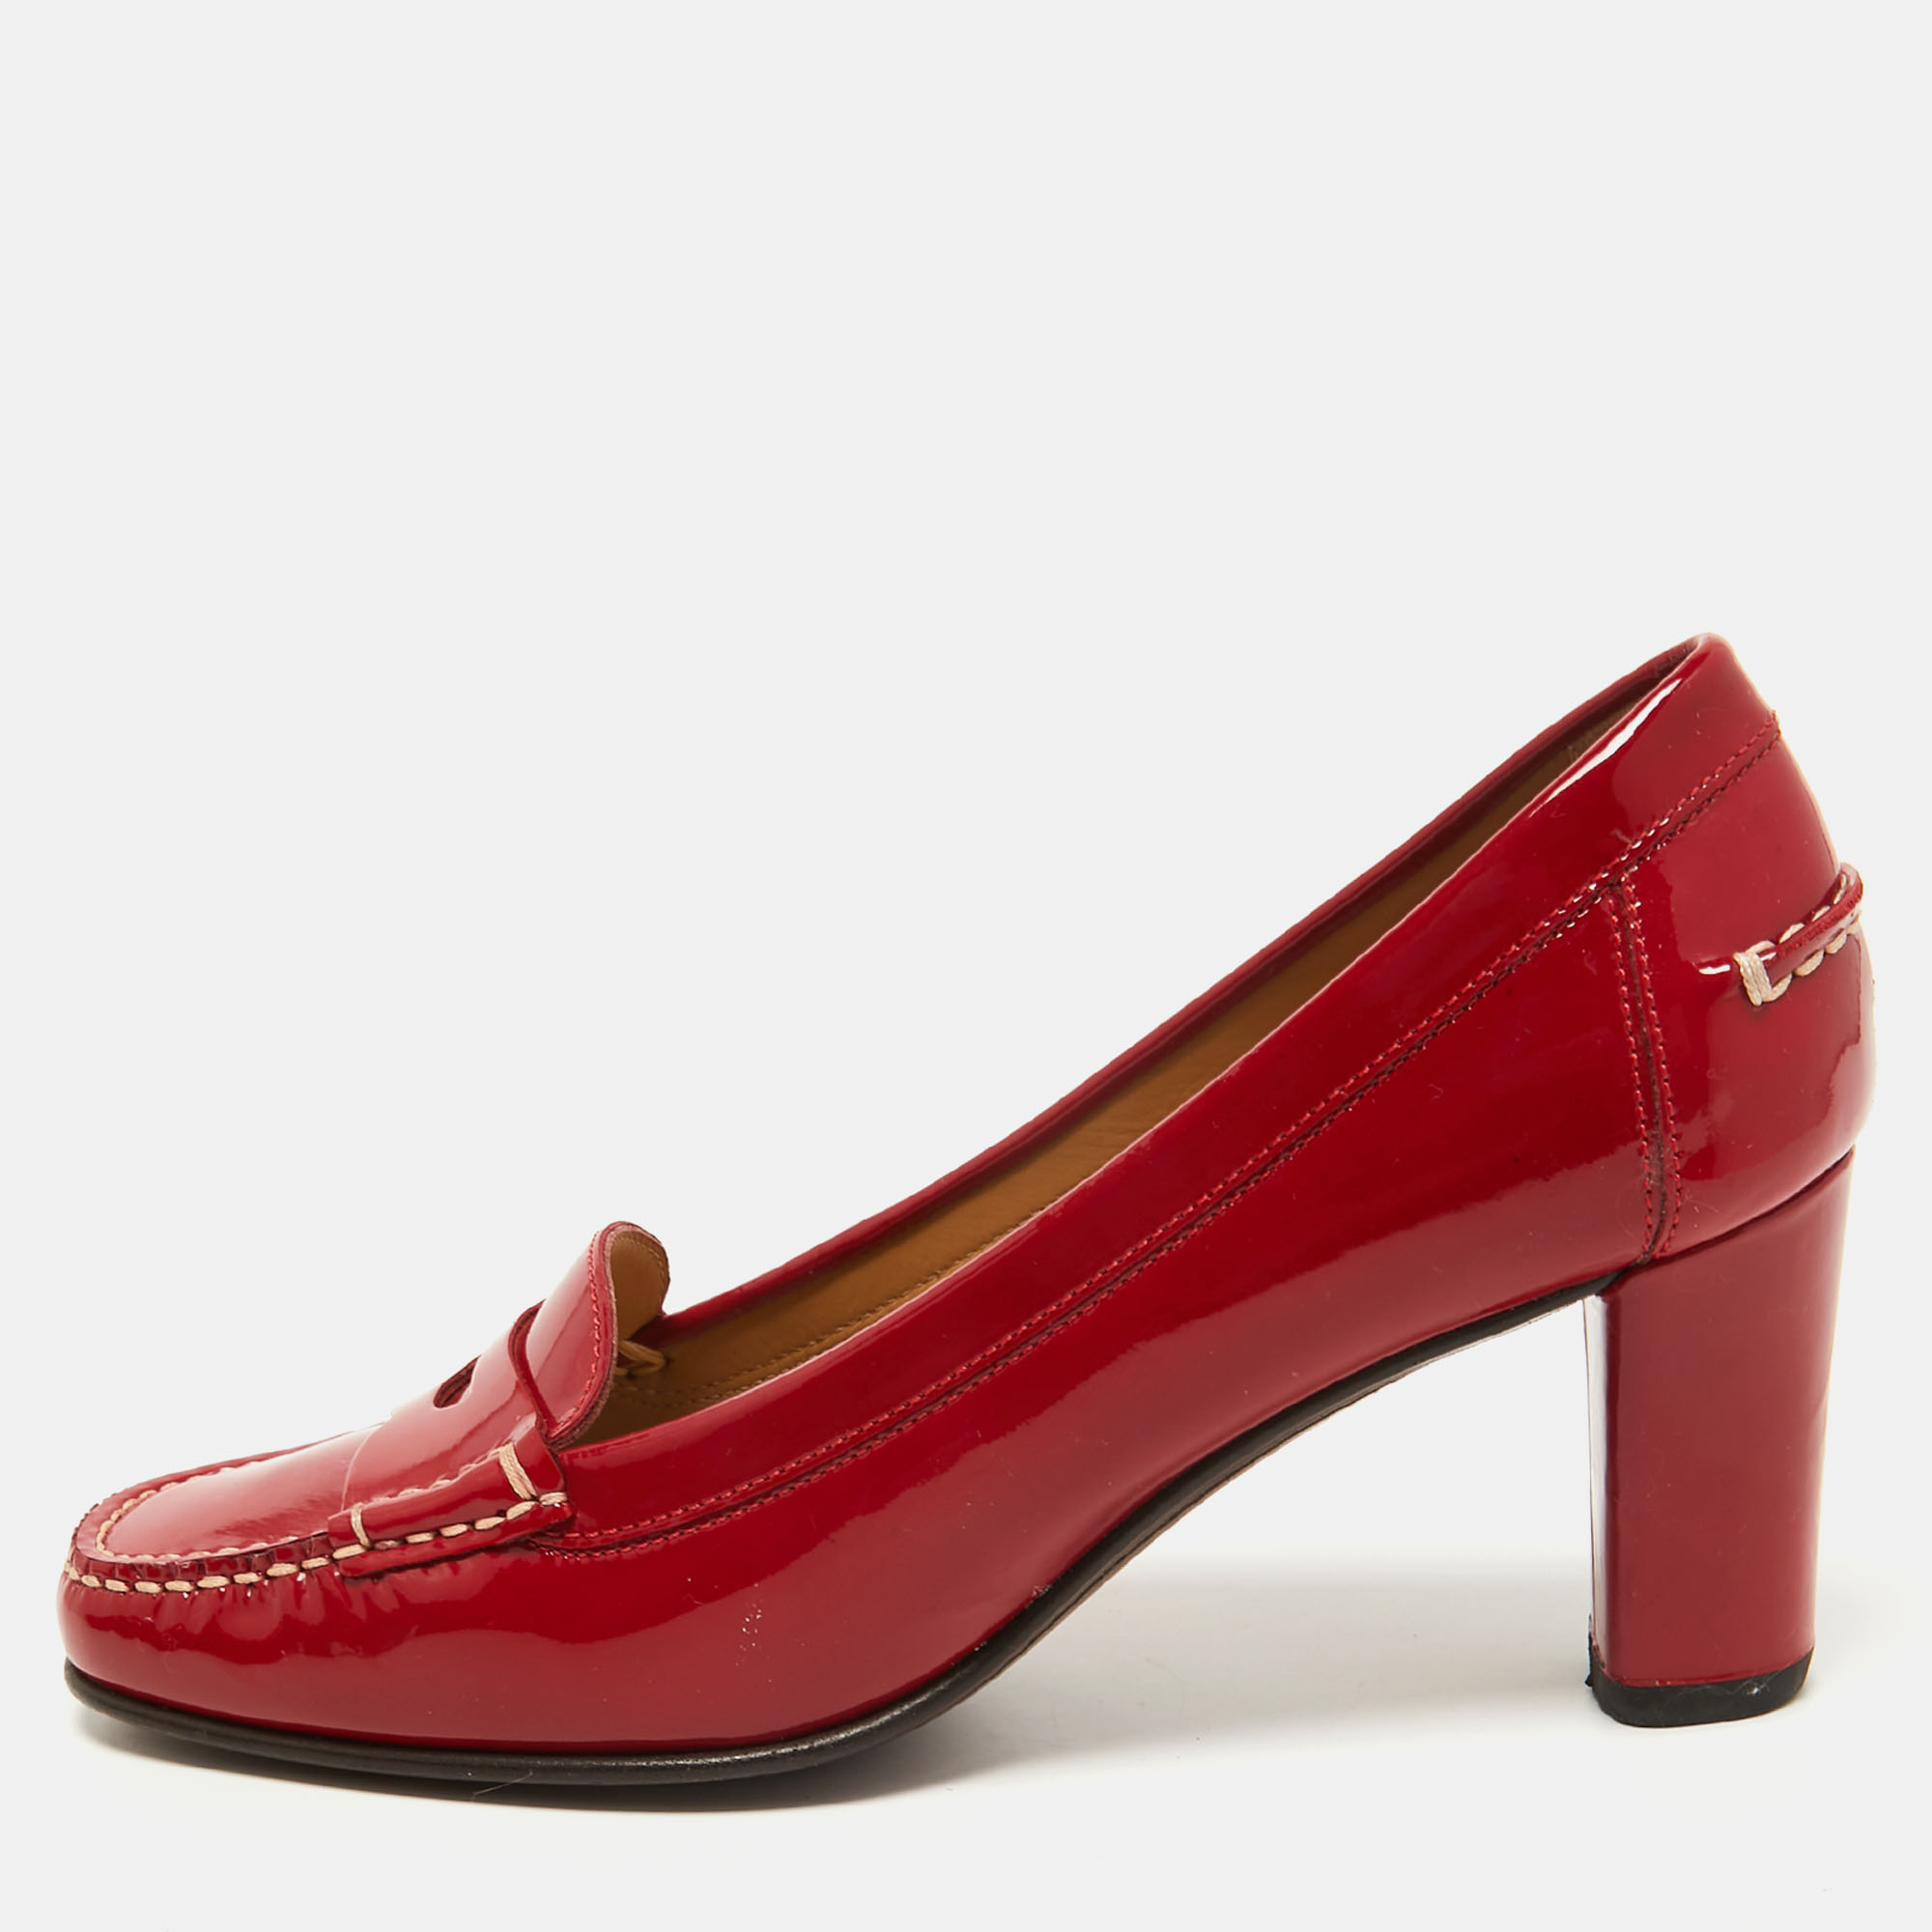 Salvatore Ferragamo Red Patent Leather Penny Slip On Loafers Size 37.5